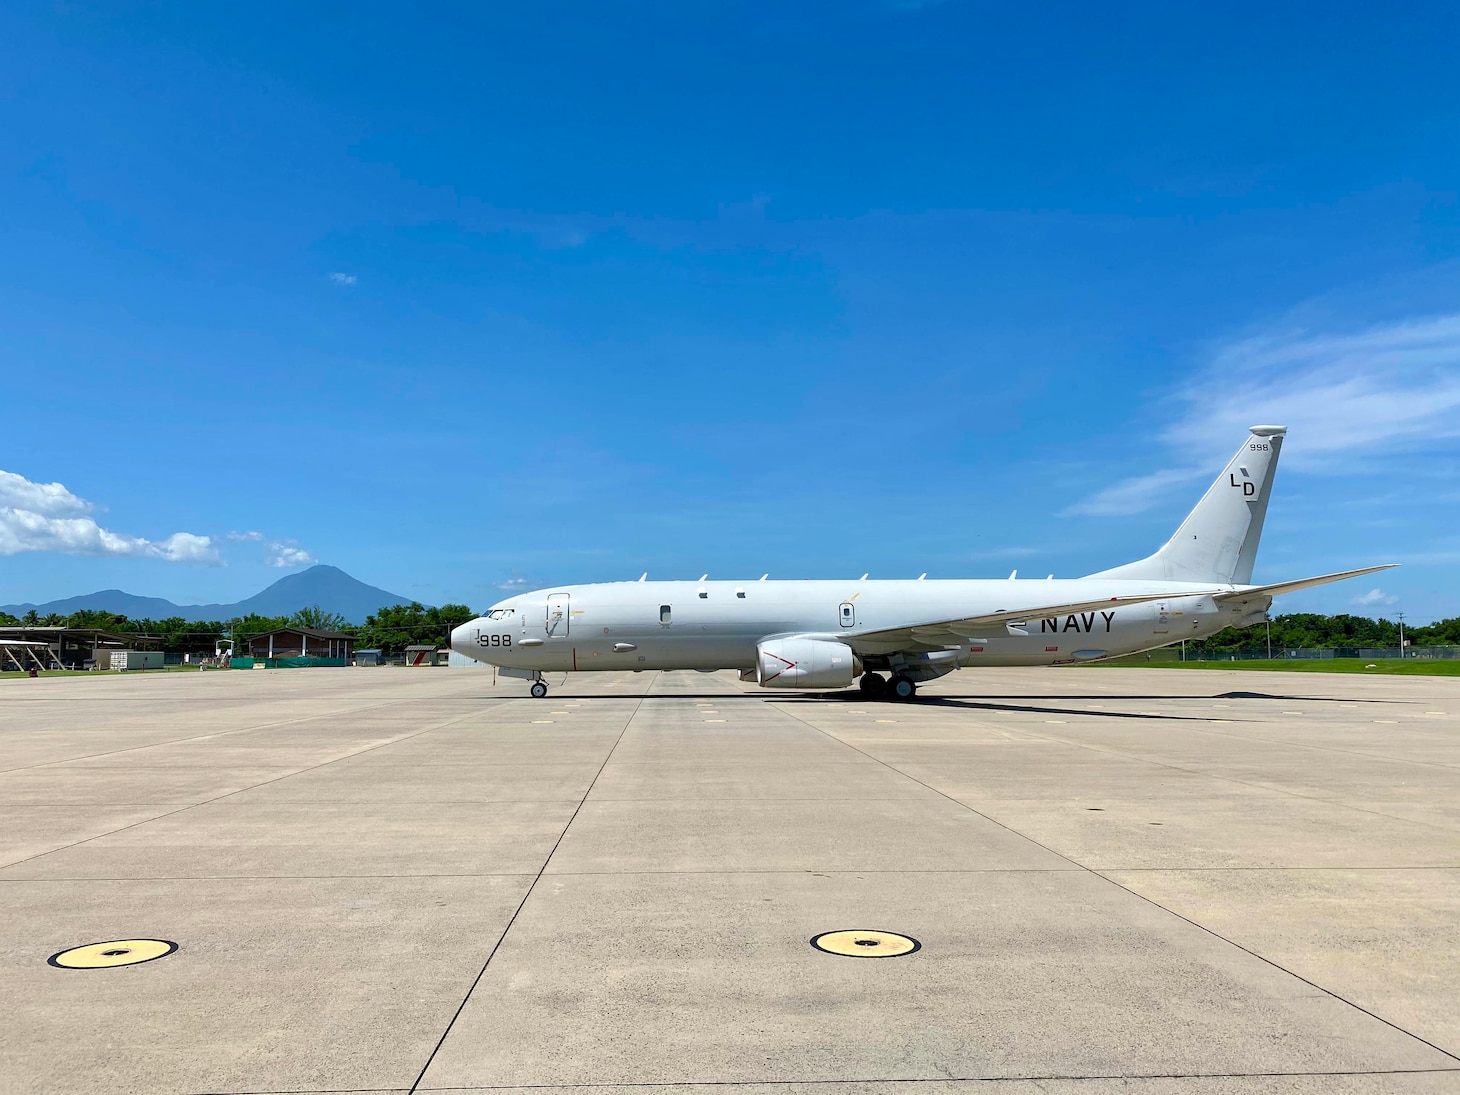 A P-8A Poseidon aircraft, attached to the “Red Lancers” of Patrol Squadron (VP) 10, waits in standby for a potential ready launch on the runway at the Cooperative Security Location (CSL) in Comalapa, El Salvador. VP-10 is deployed to U.S. Naval Forces Southern Command/U.S. 4th Fleet supporting Commander, Task Force (CTF) 47 performing maritime patrol and reconnaissance (MPRA) missions throughout the Caribbean, and Central and South America